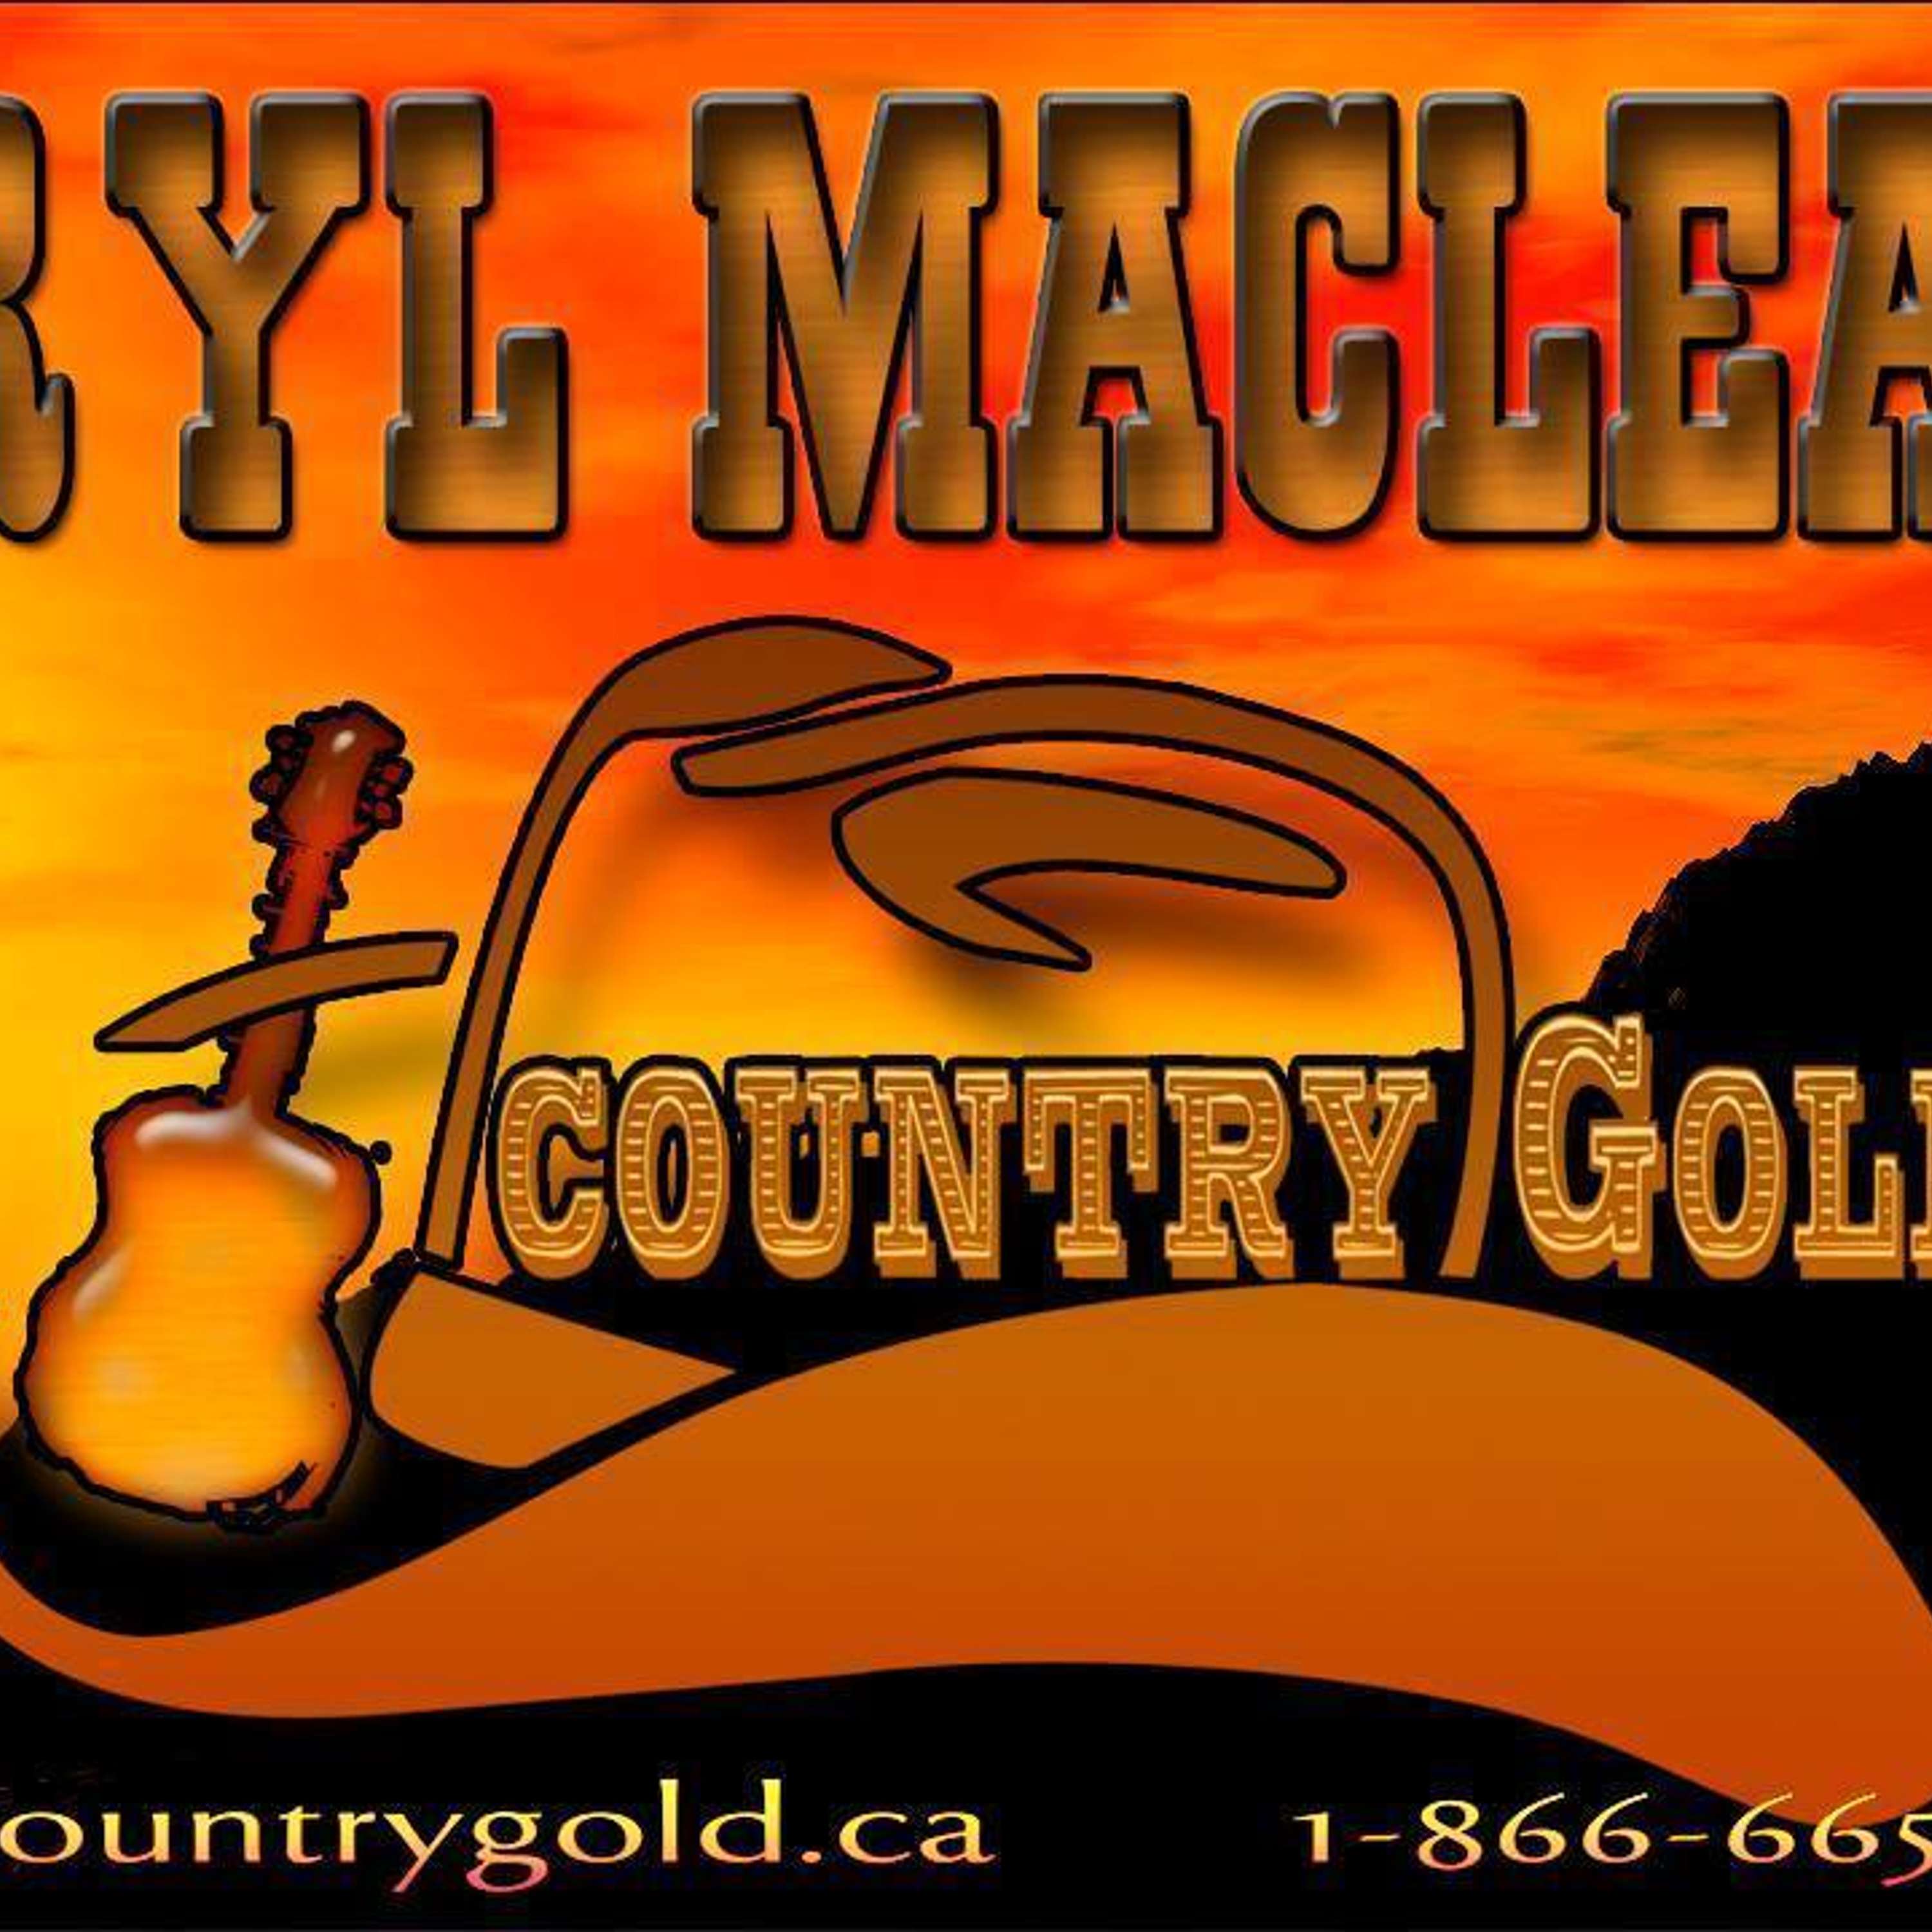 Daryl MacLean's COUNTRY GOLD